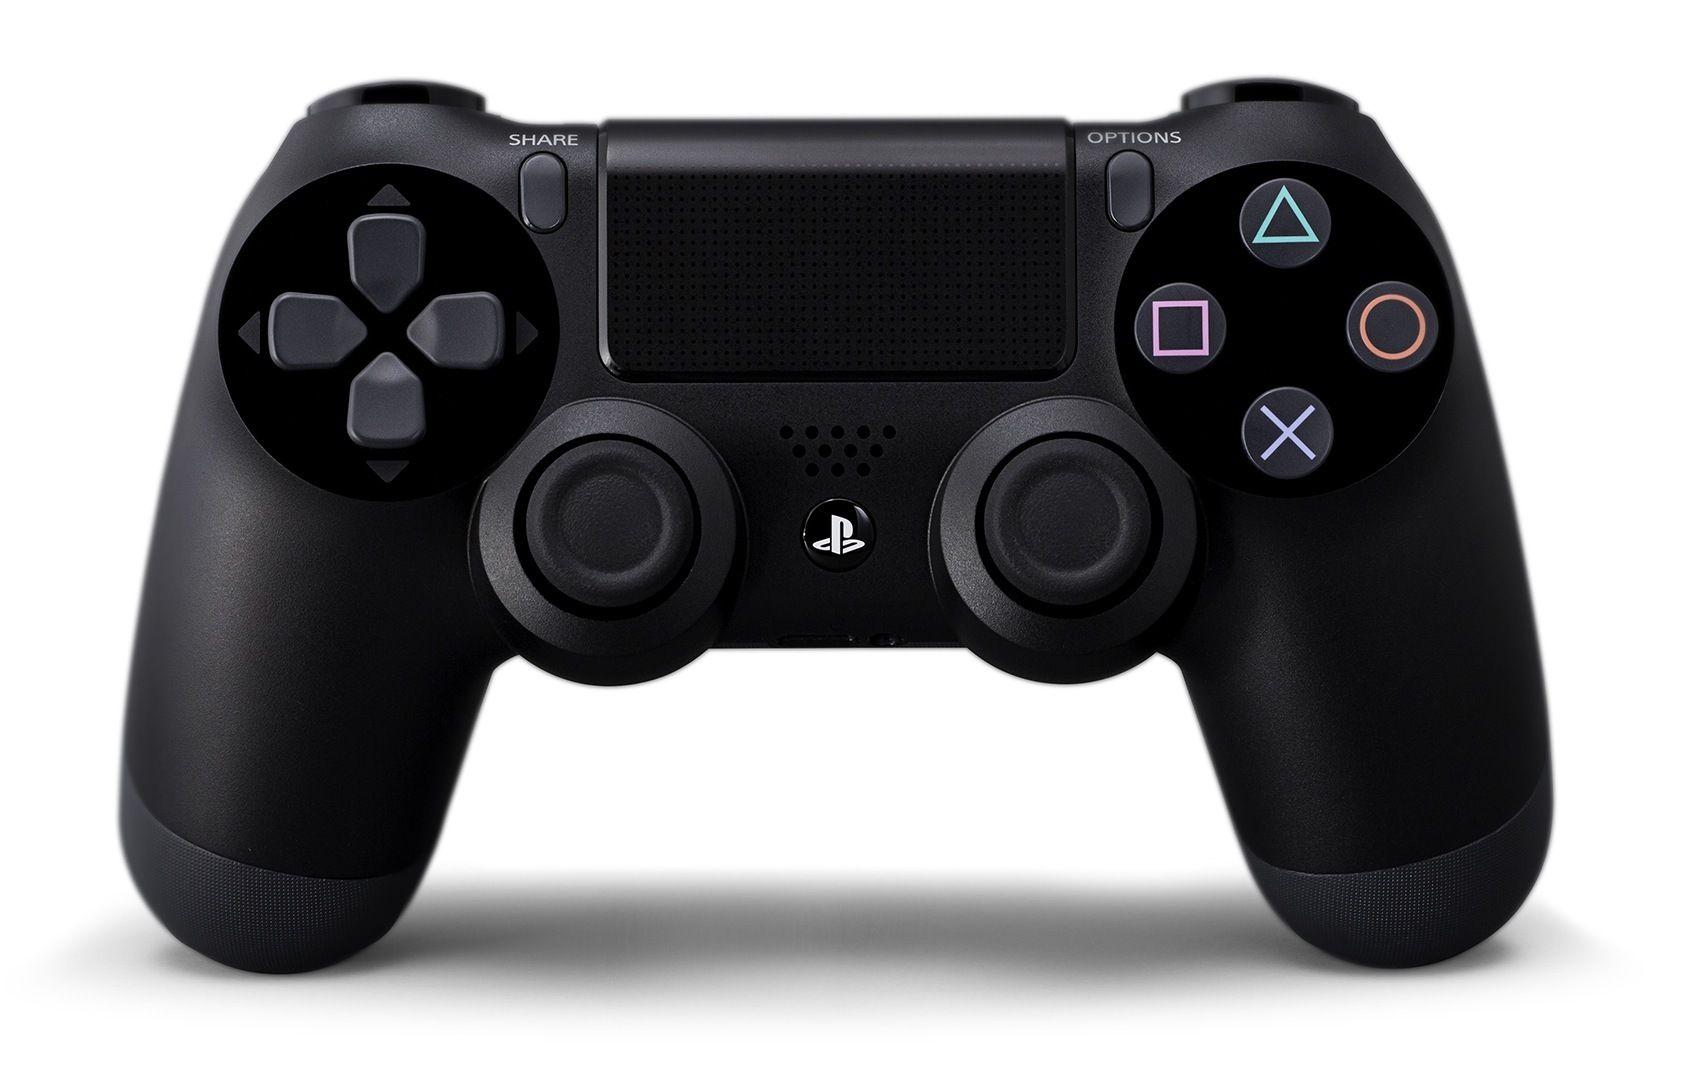 High Quality Ps4 Controller Wallpaper. Full HD Picture